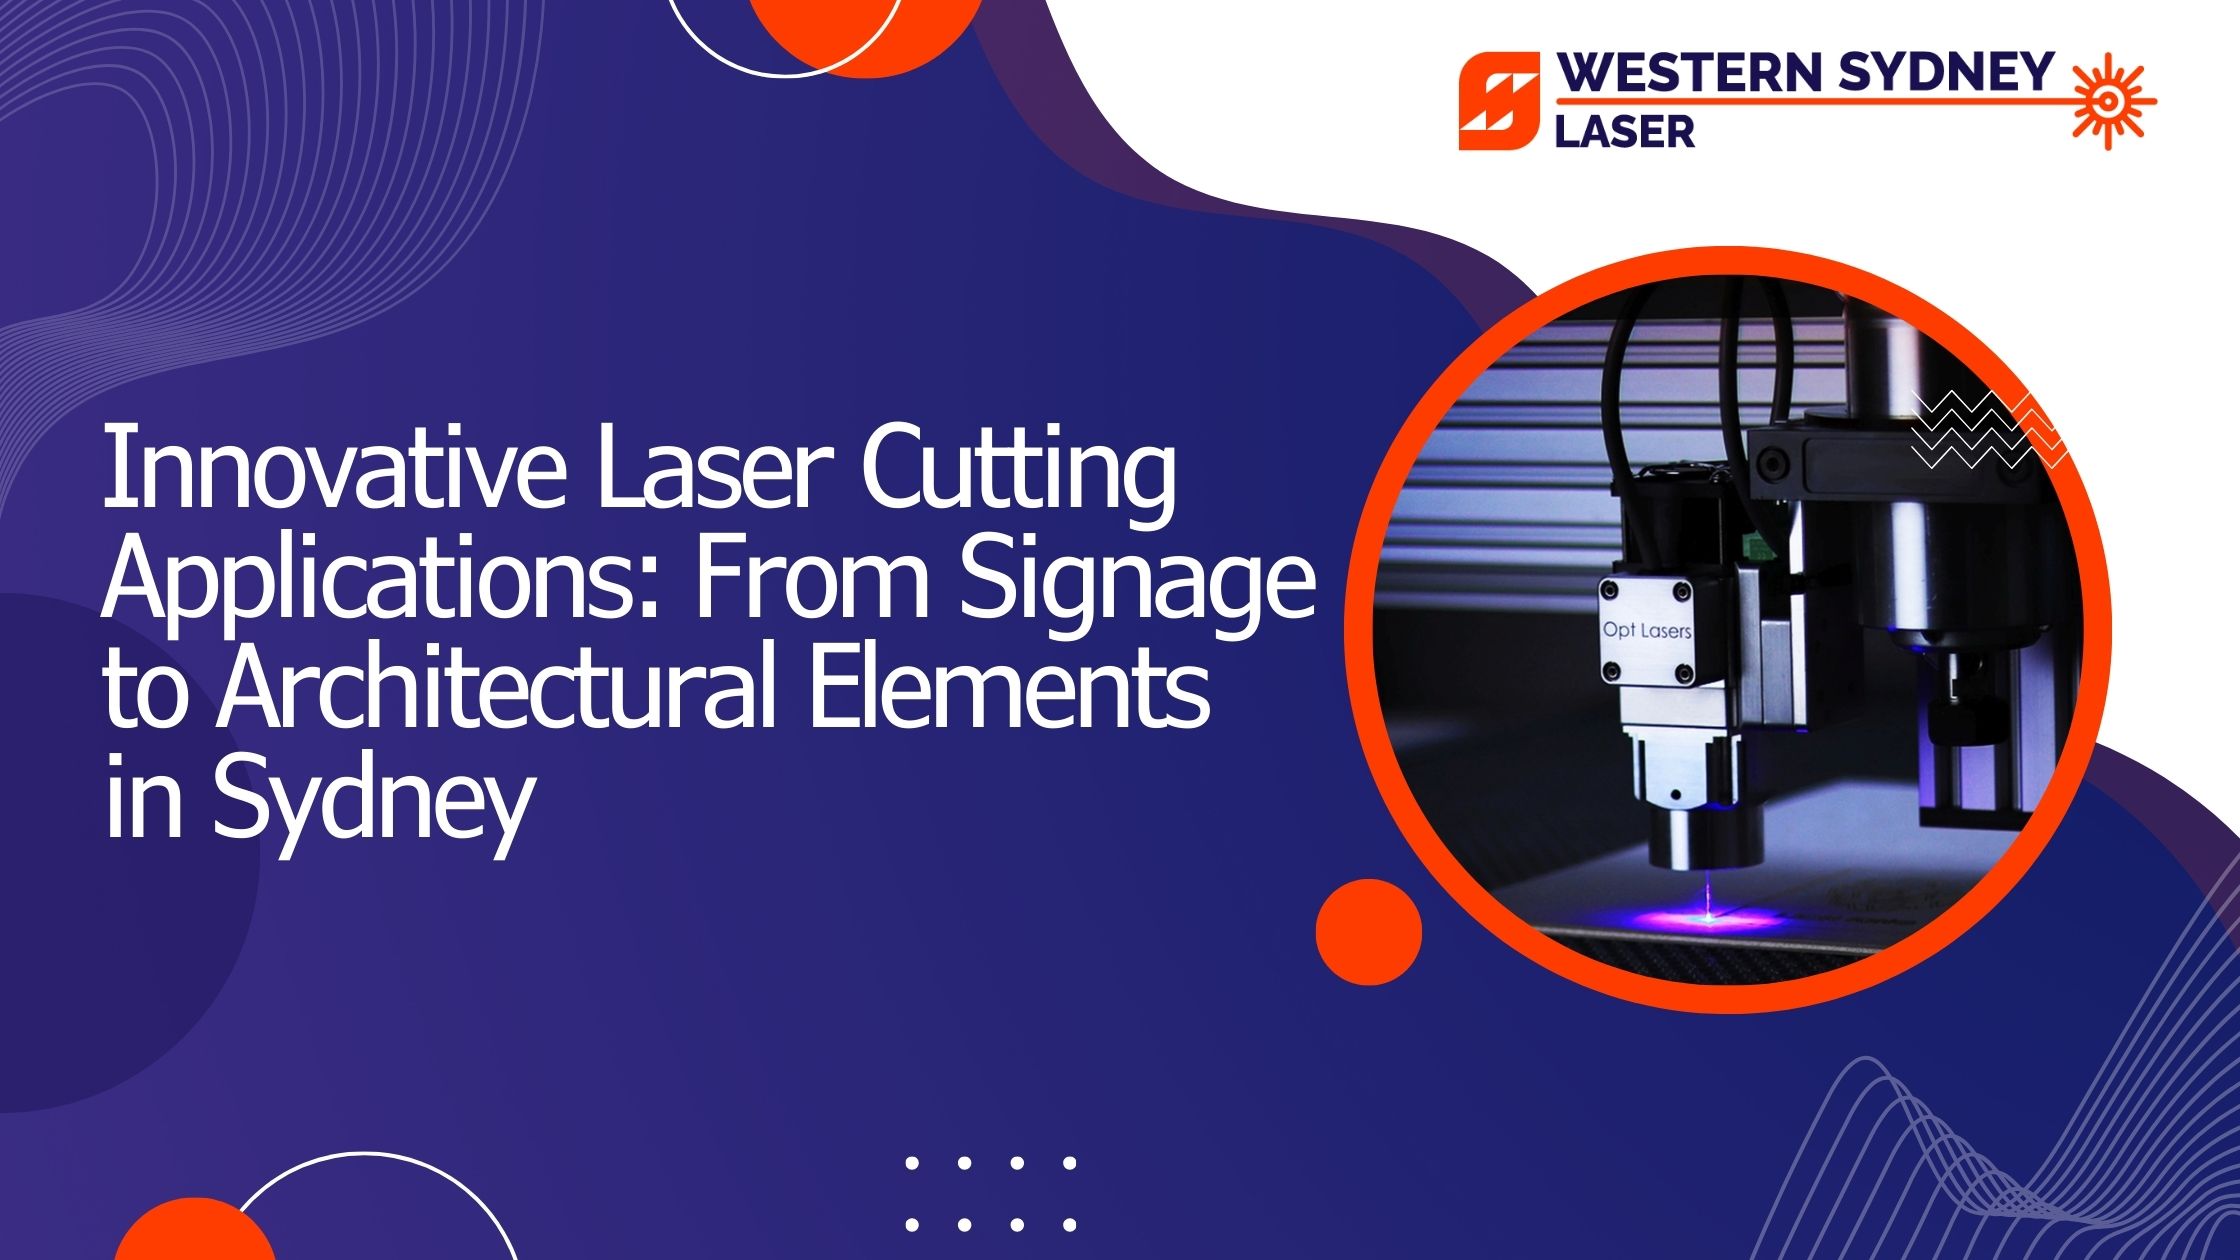 Innovative Laser Cutting Applications: From Signage to Architectural Elements in Sydney